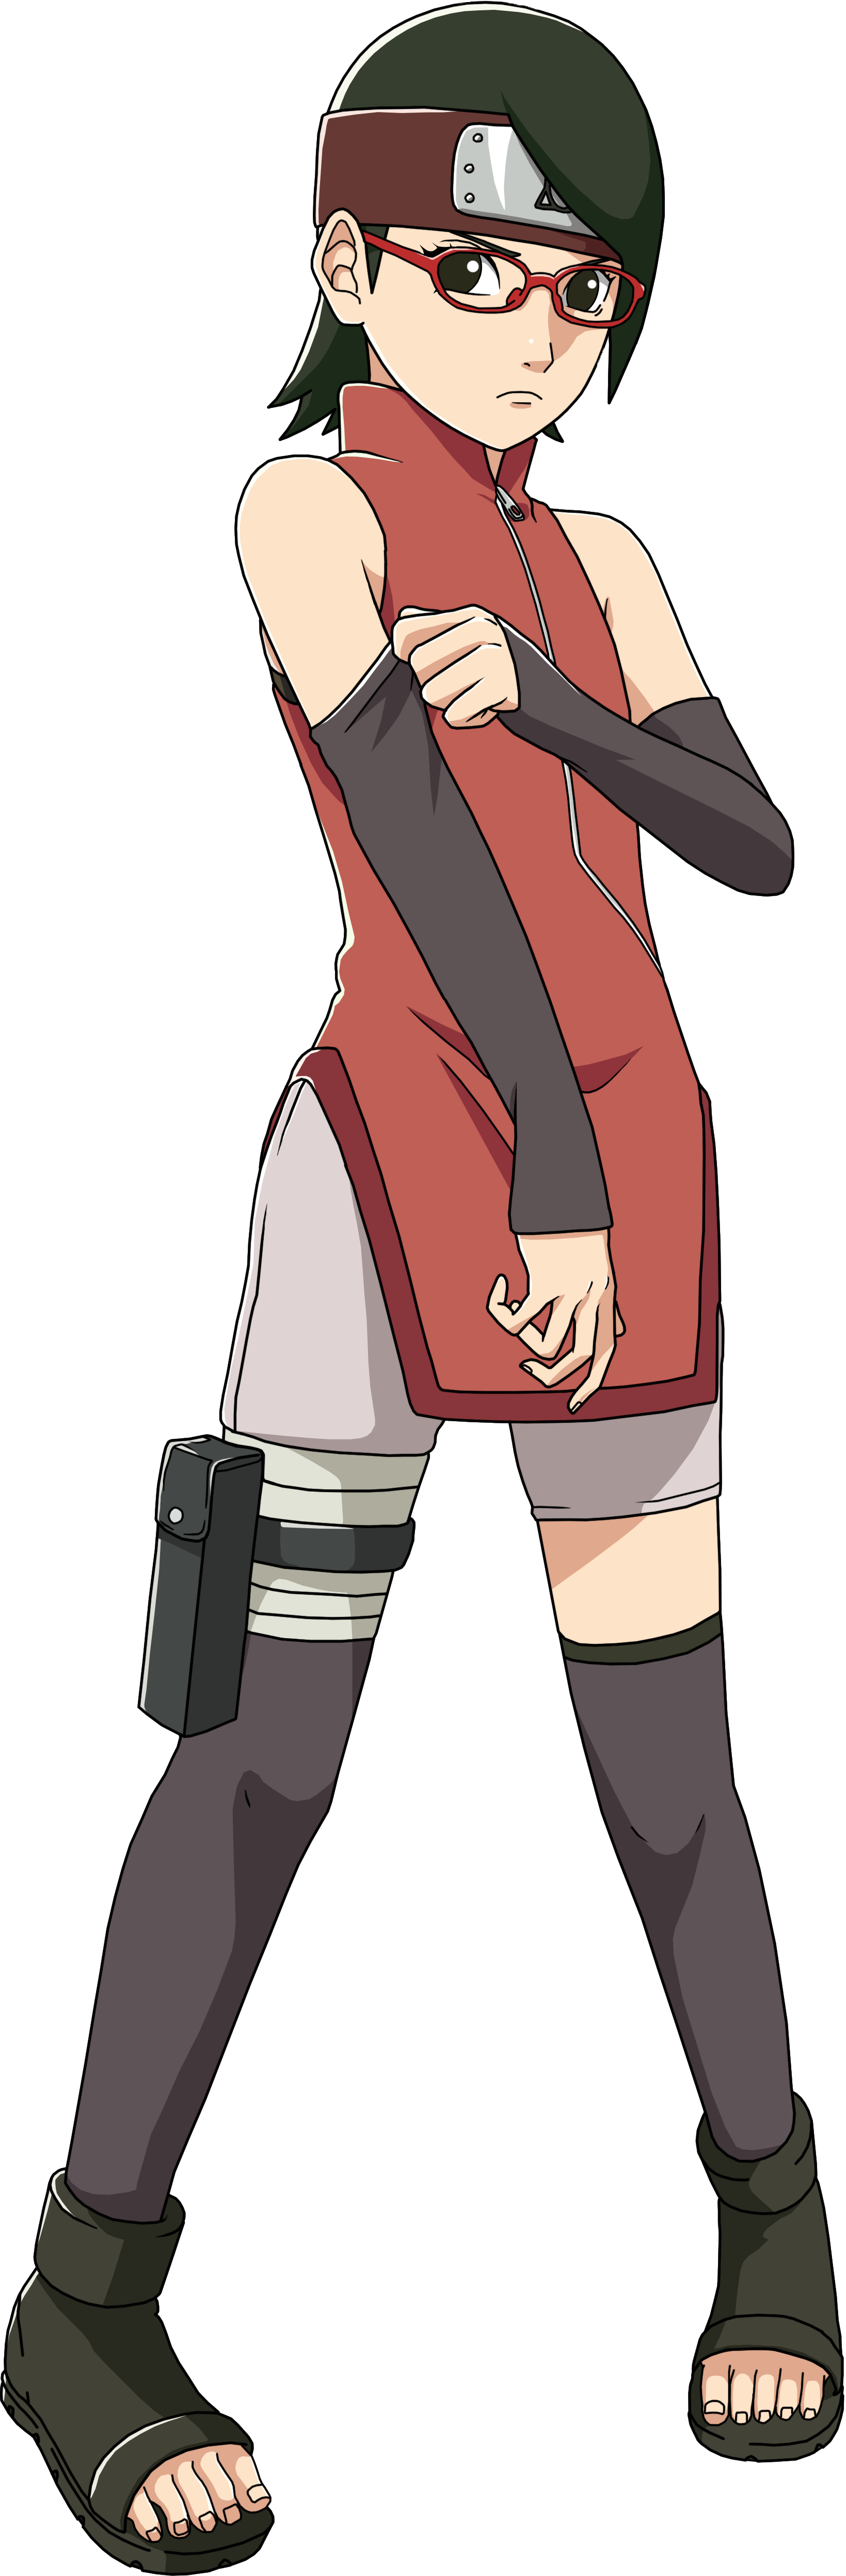 https://vignette3.wikia.nocookie.net/naruto/images/0/01/Sarada.png/revision/latest?cb=20160127001